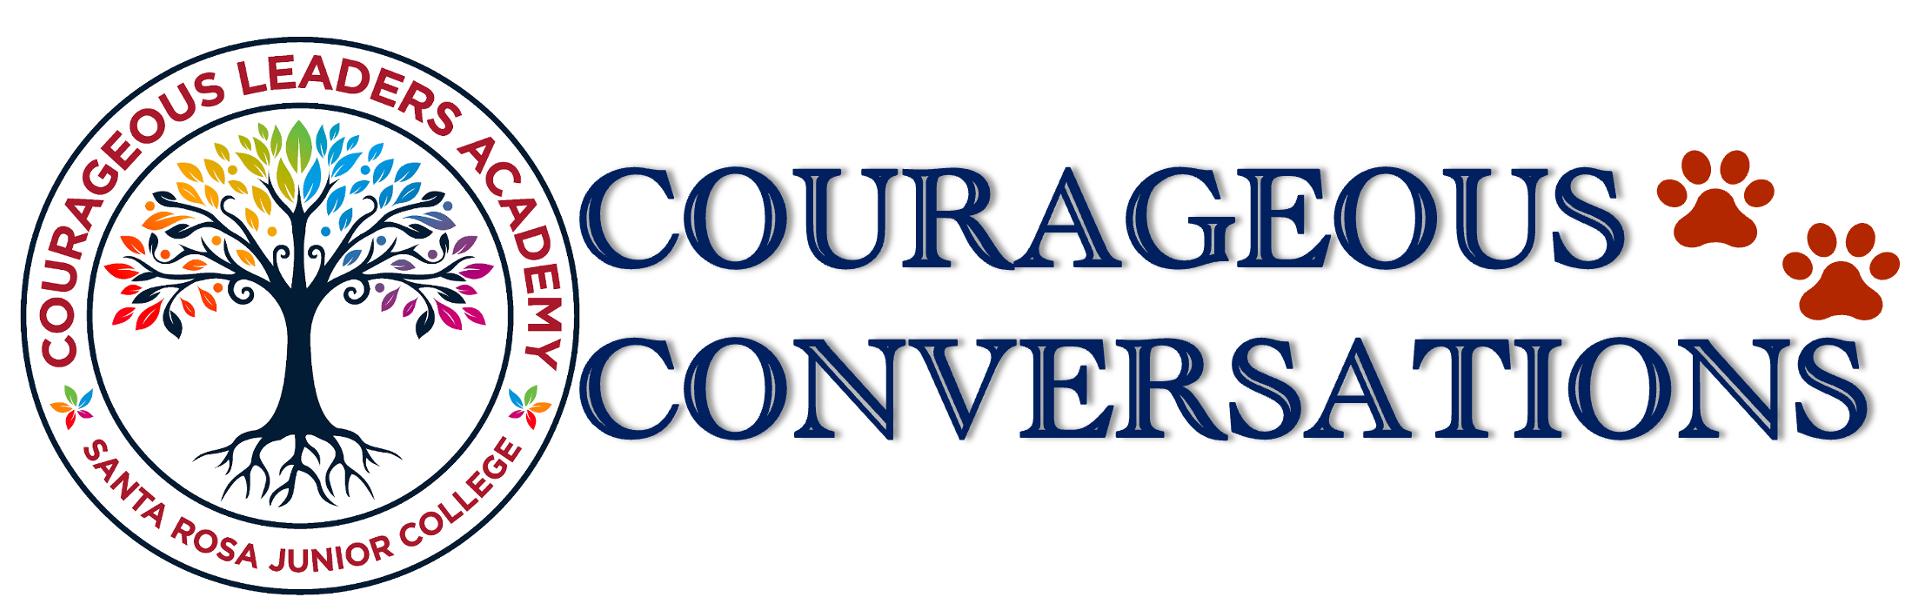 Logo of Courageous Conversations committee